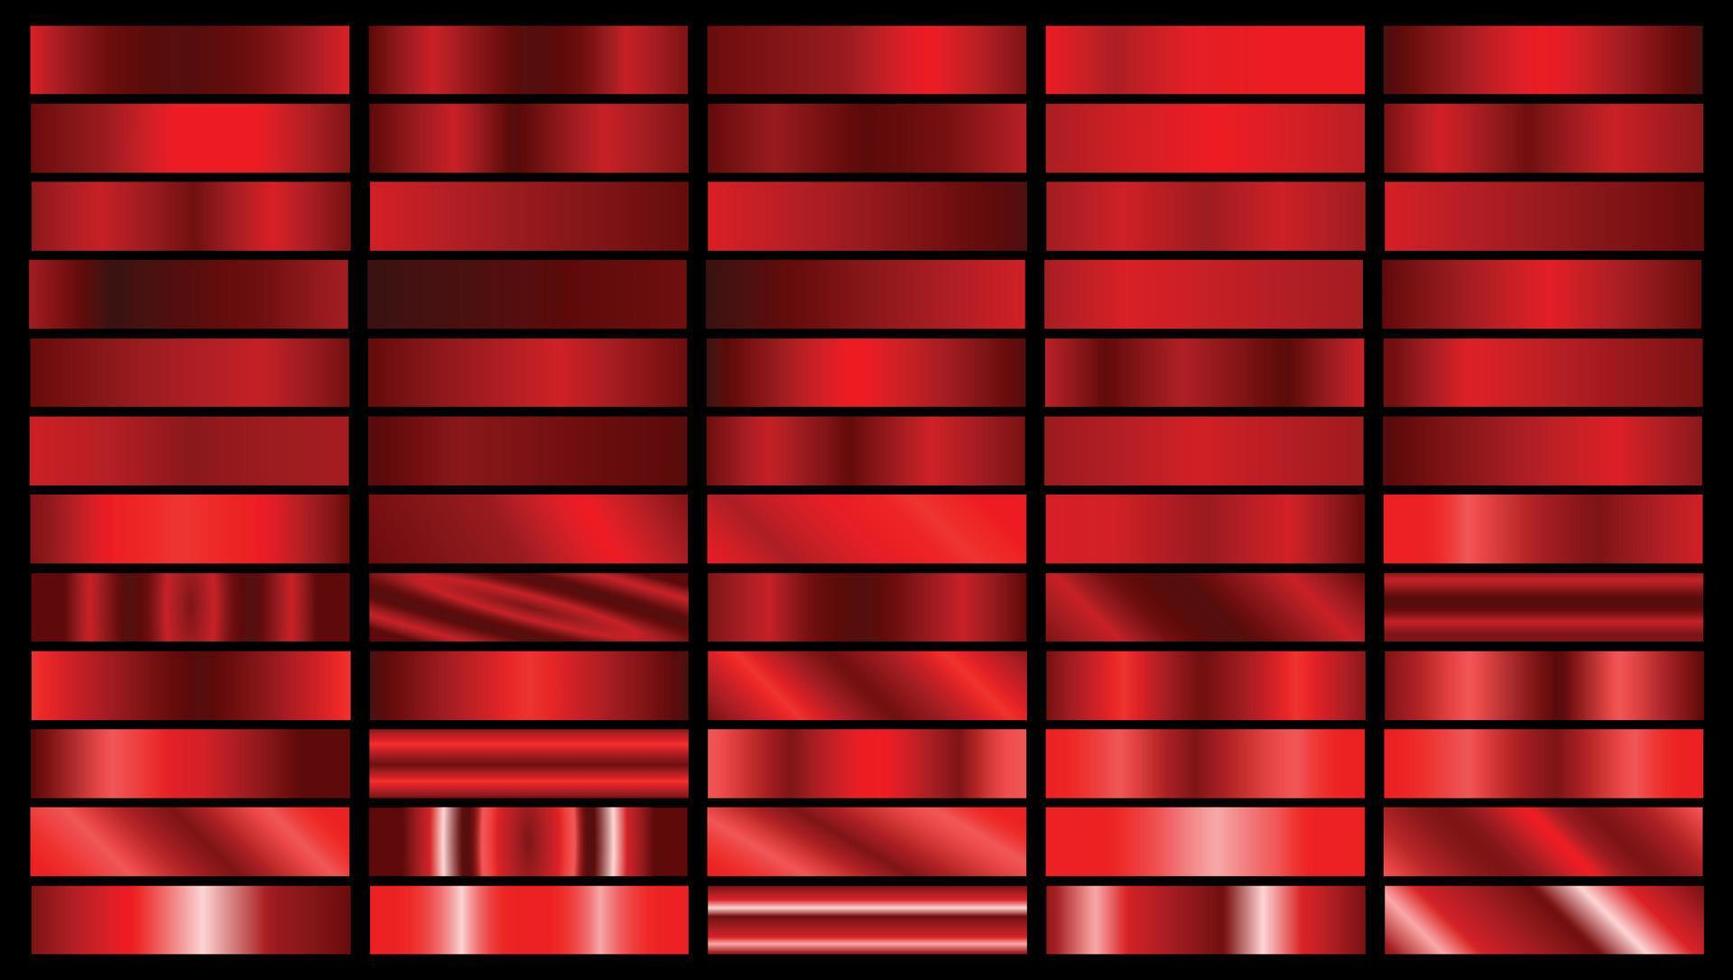 red metallic gradients for print or post design backgrounds vector